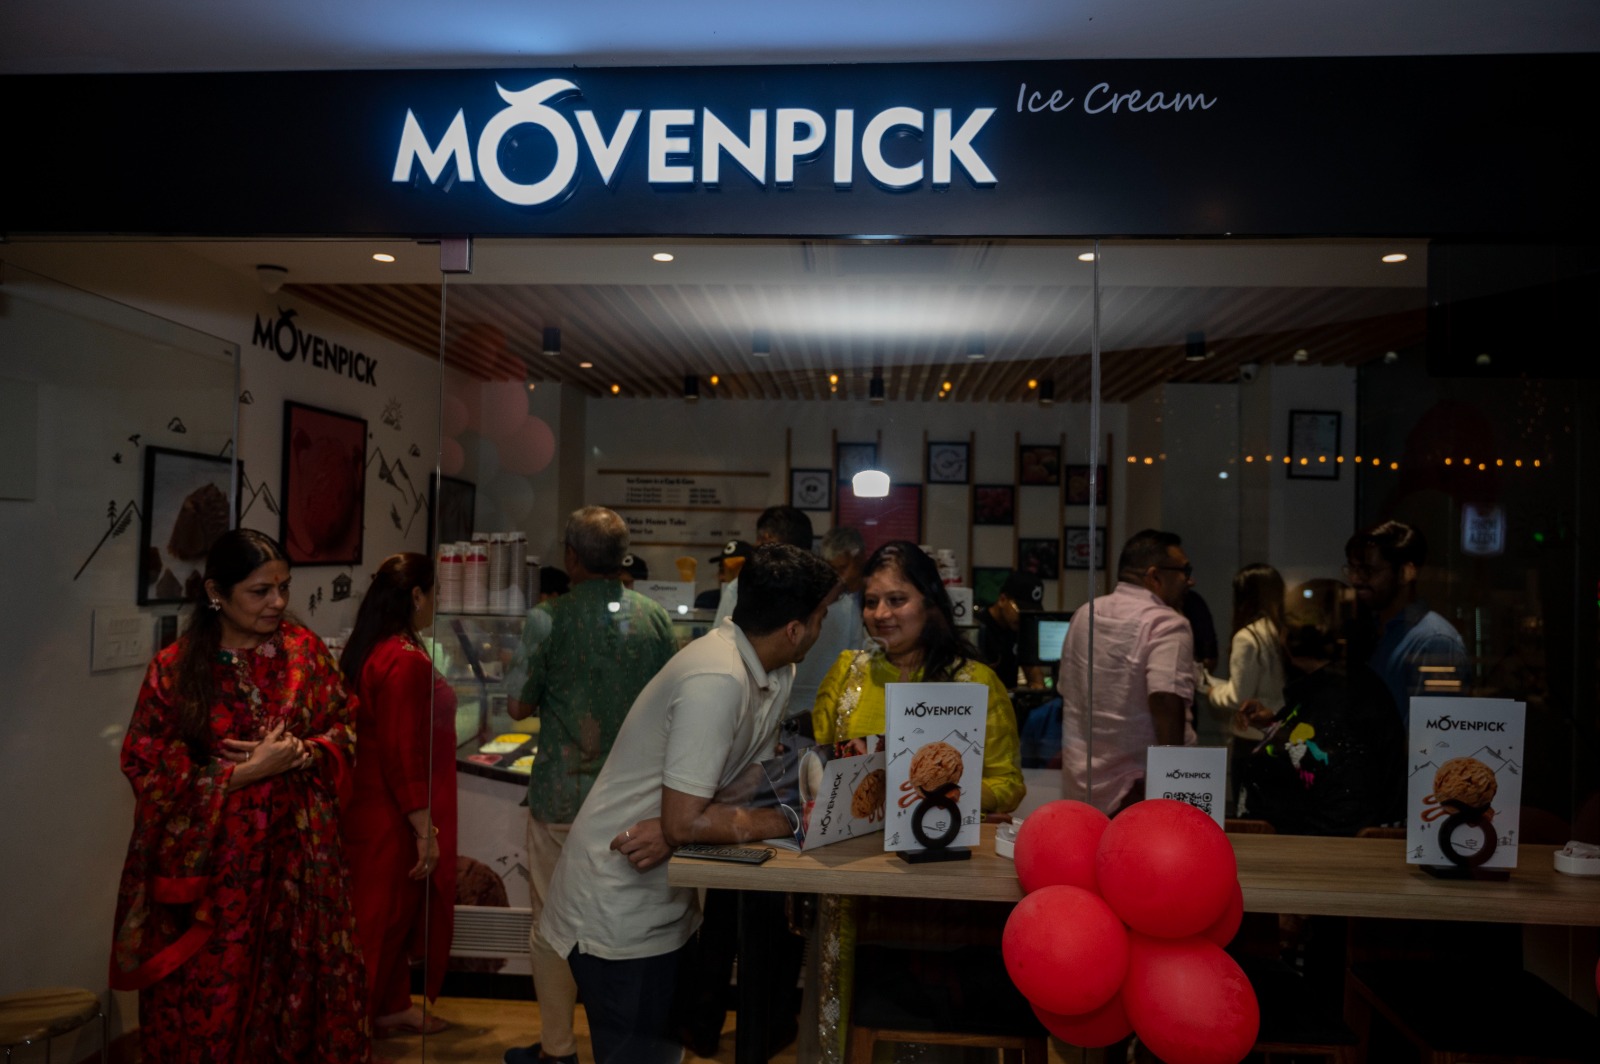 Introducing Movenpick Ice Cream: swiss delight now in the heart of Nepal